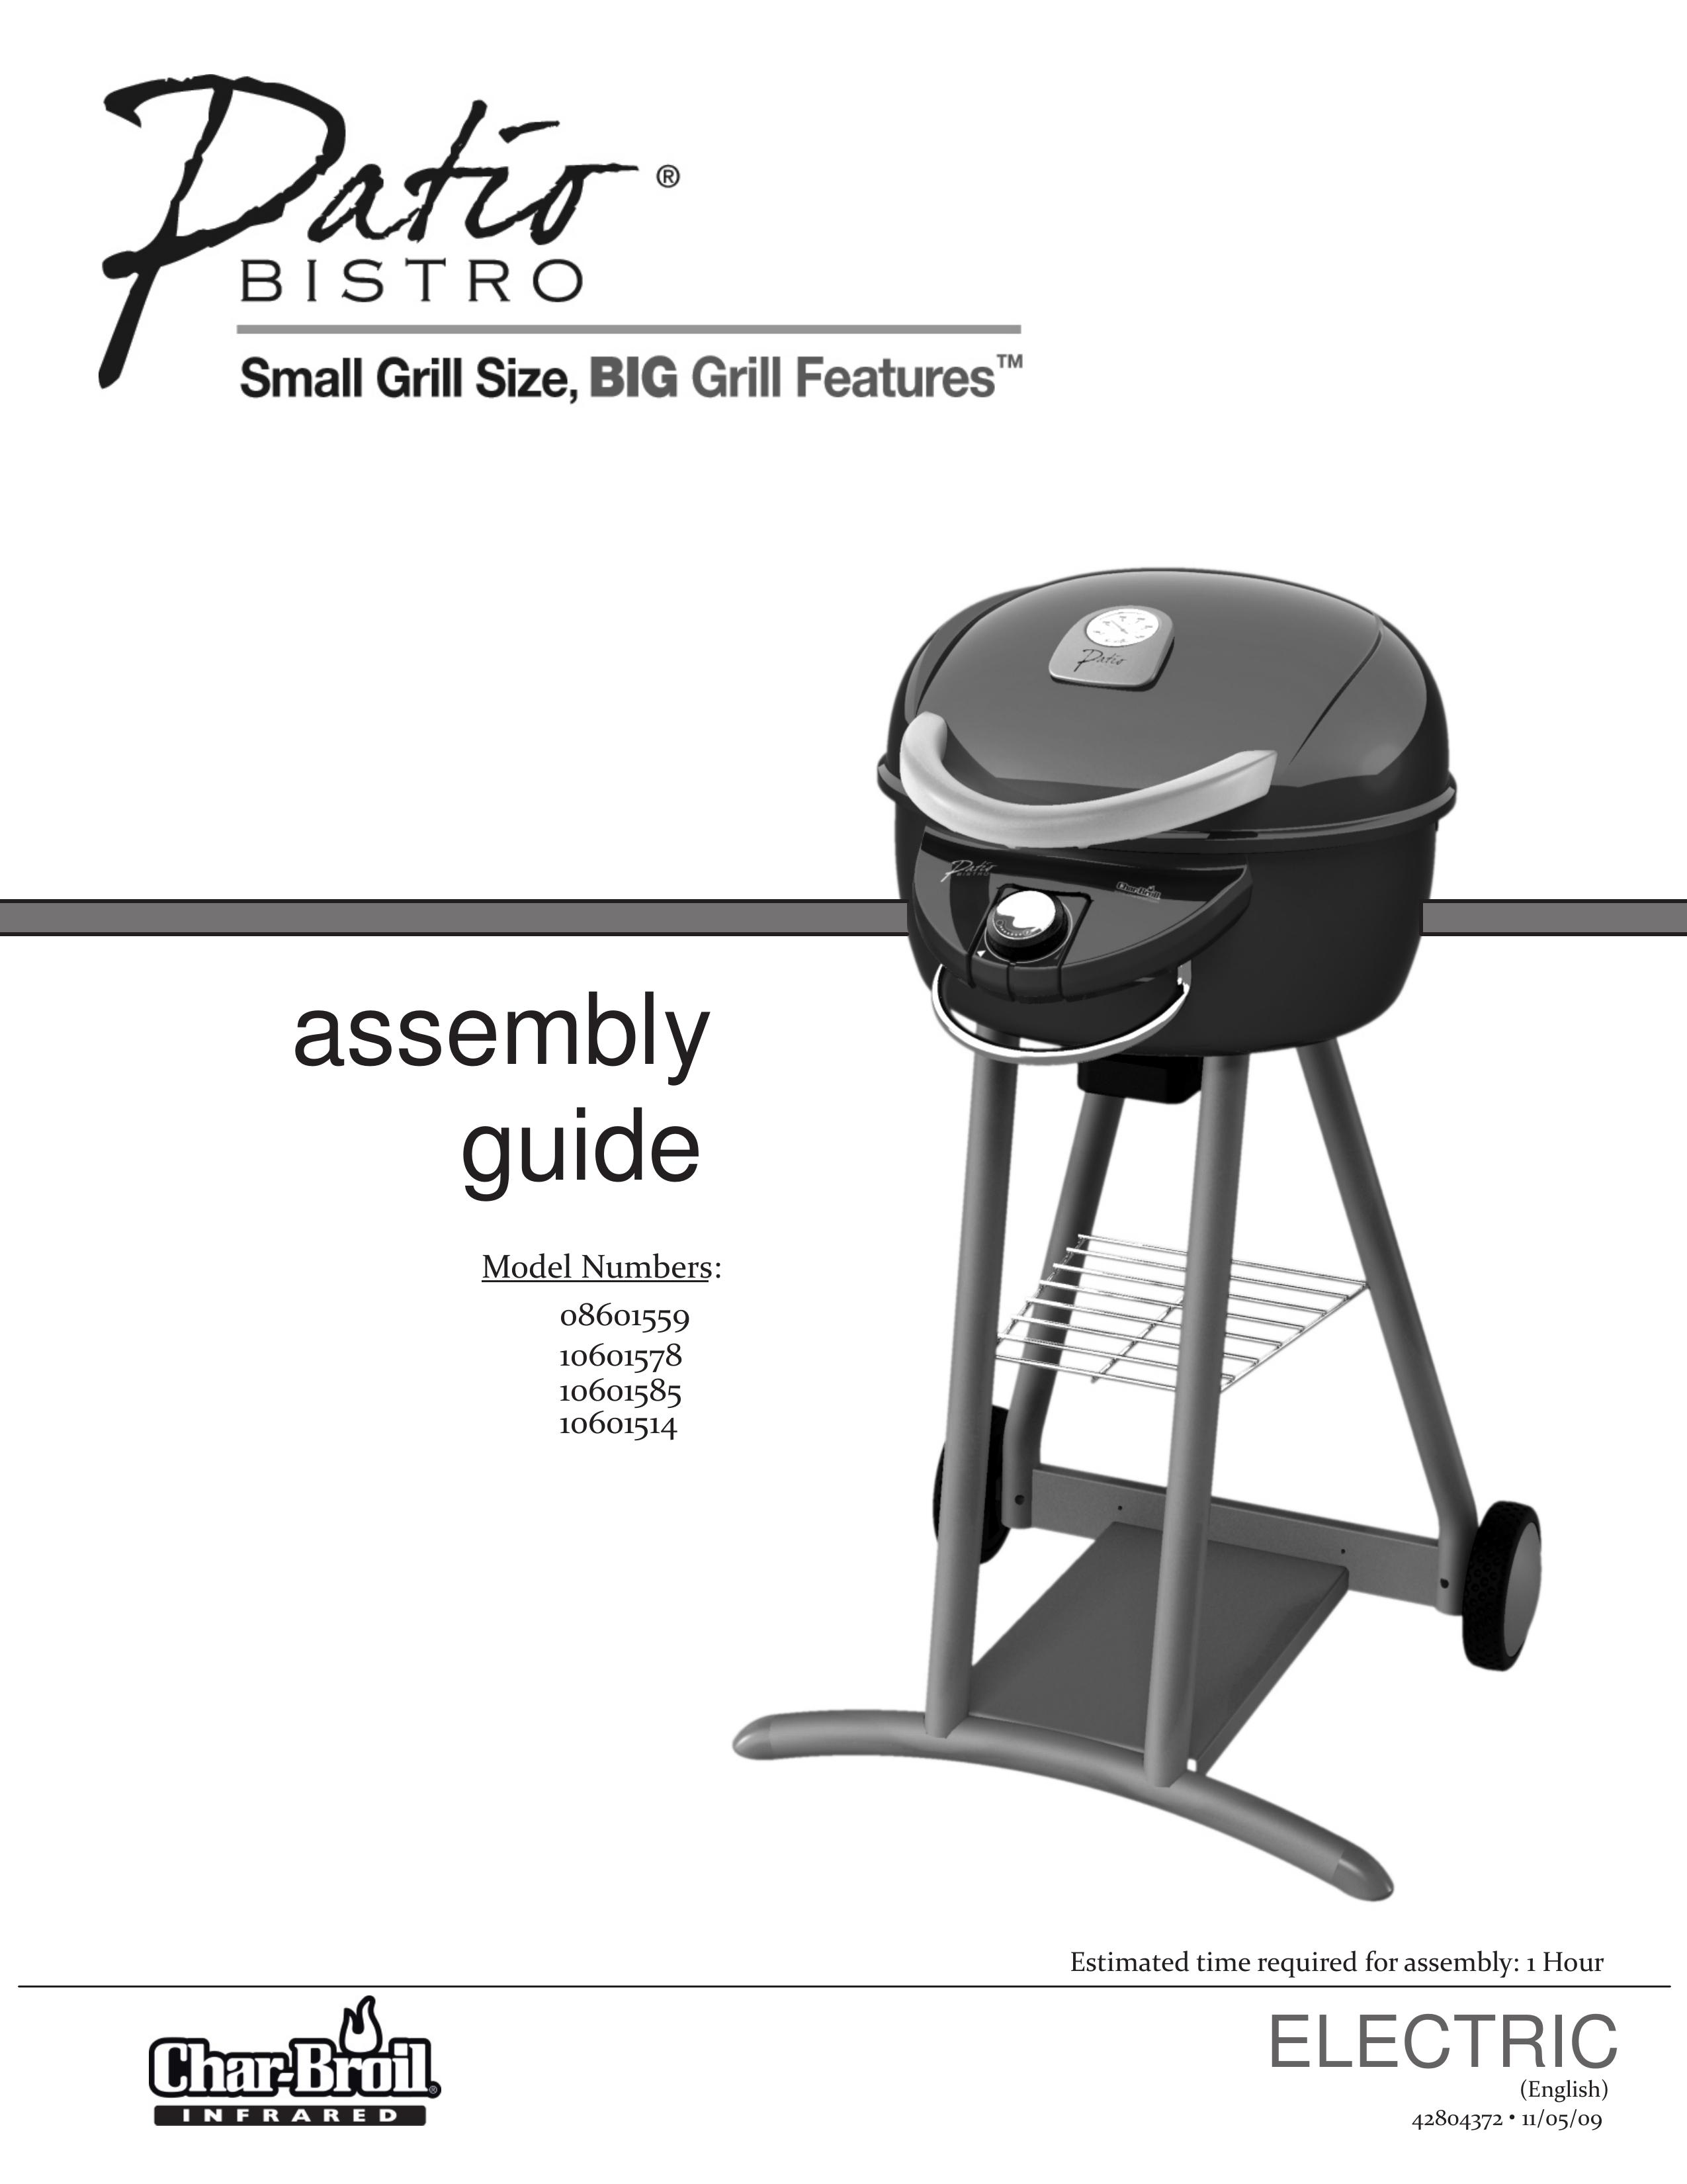 Char-Broil 10601585 Electric Grill User Manual (Page 1)